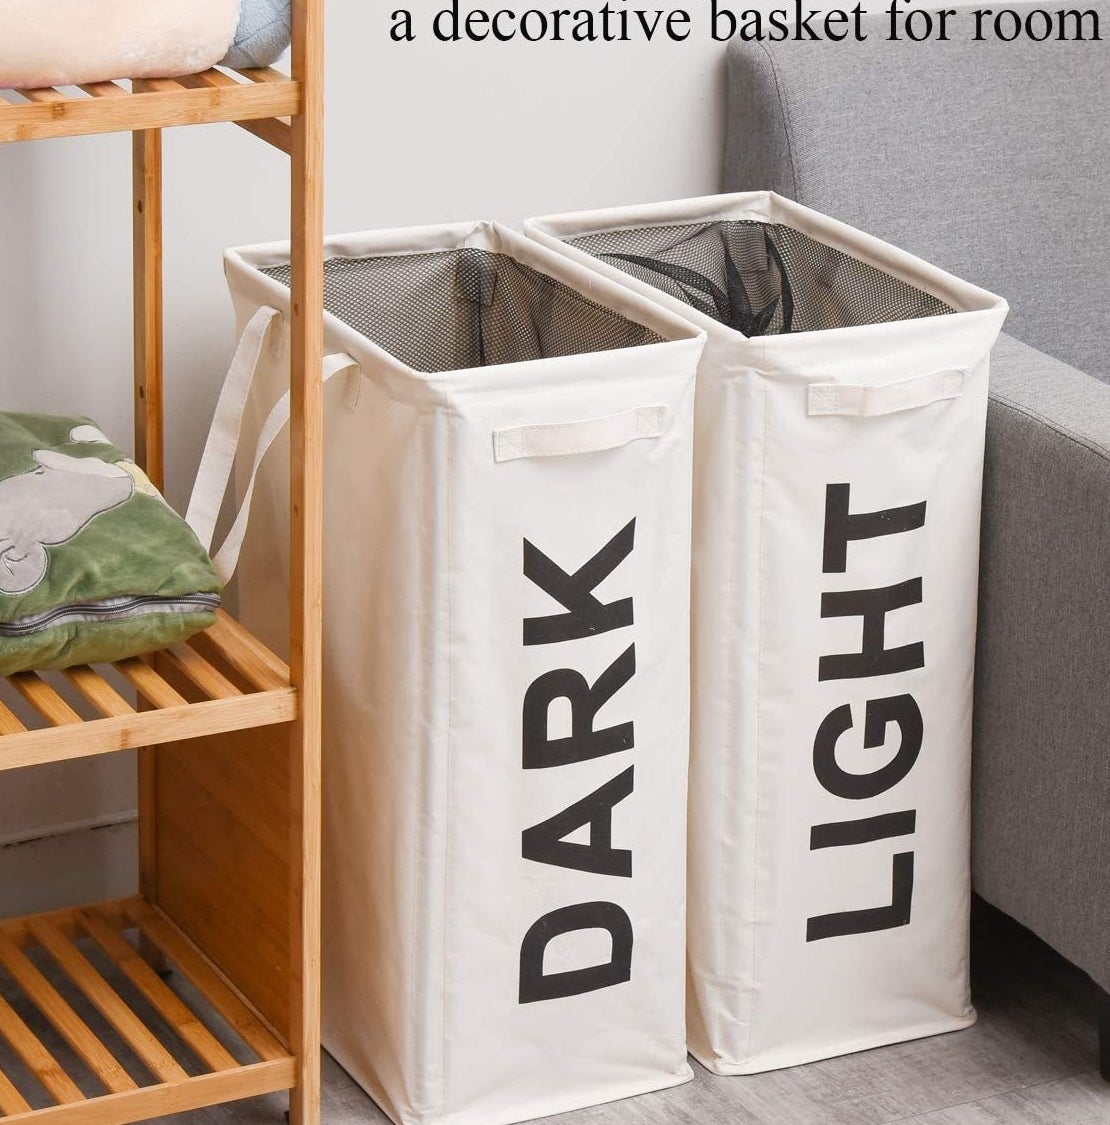 a pair of light and dark hampers tucked next to a couch